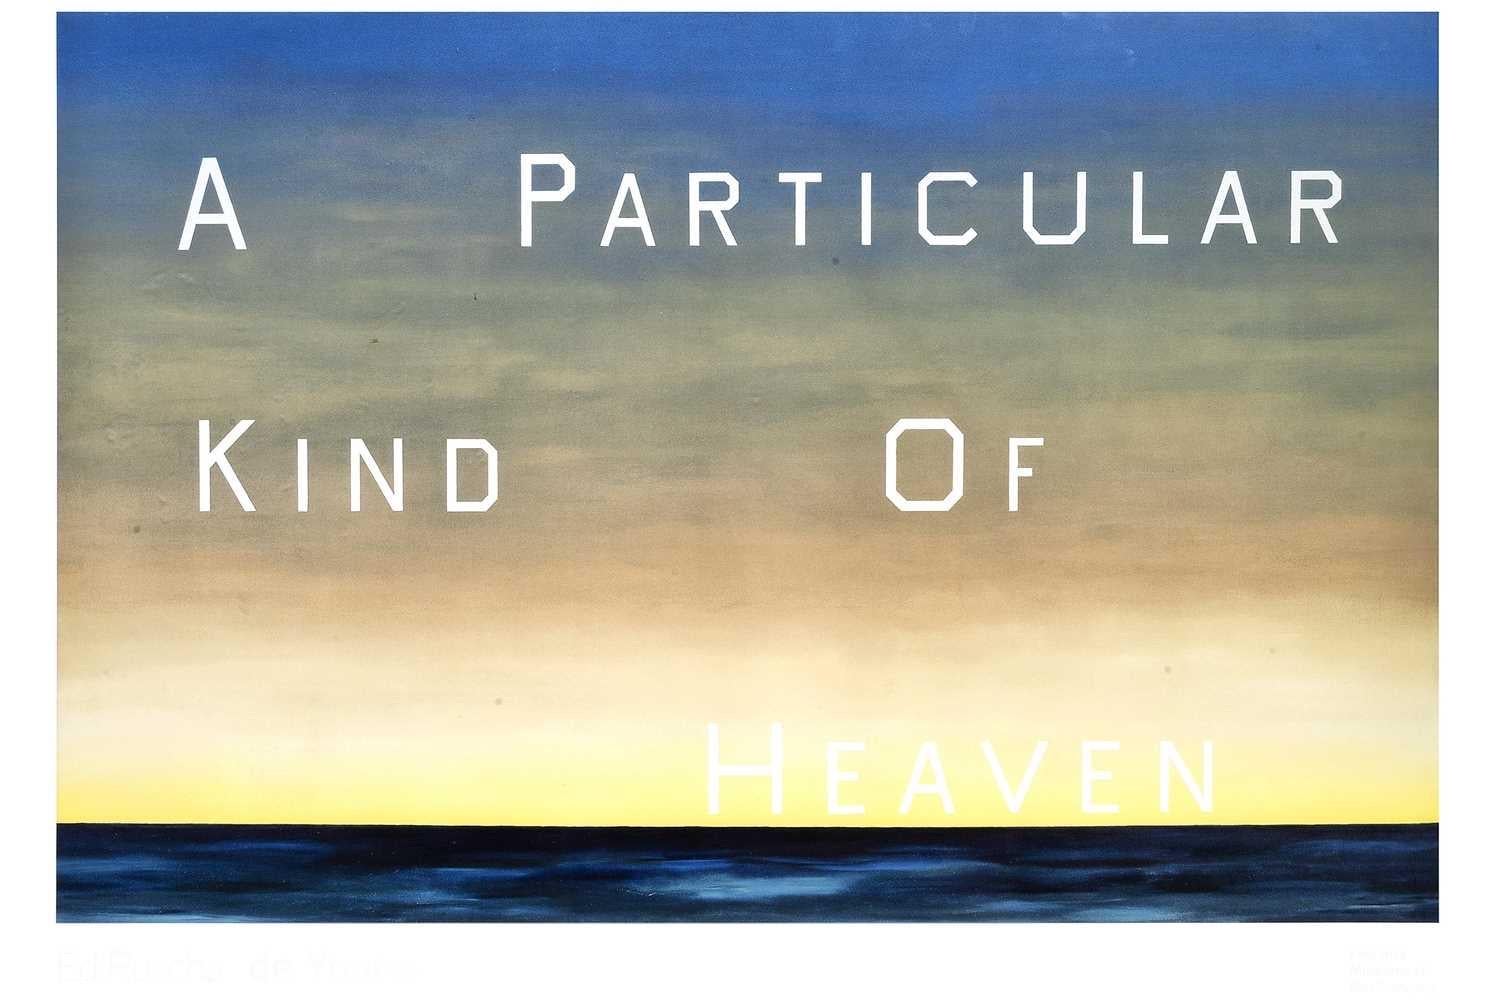 Ed Ruscha, A Particular Kind Of Heaven, 1983

Fine Arts Museums of San Francisco exhibition poster

Offset lithograph on paper

61 x 92cm (24 x 36in)

Pristine condition